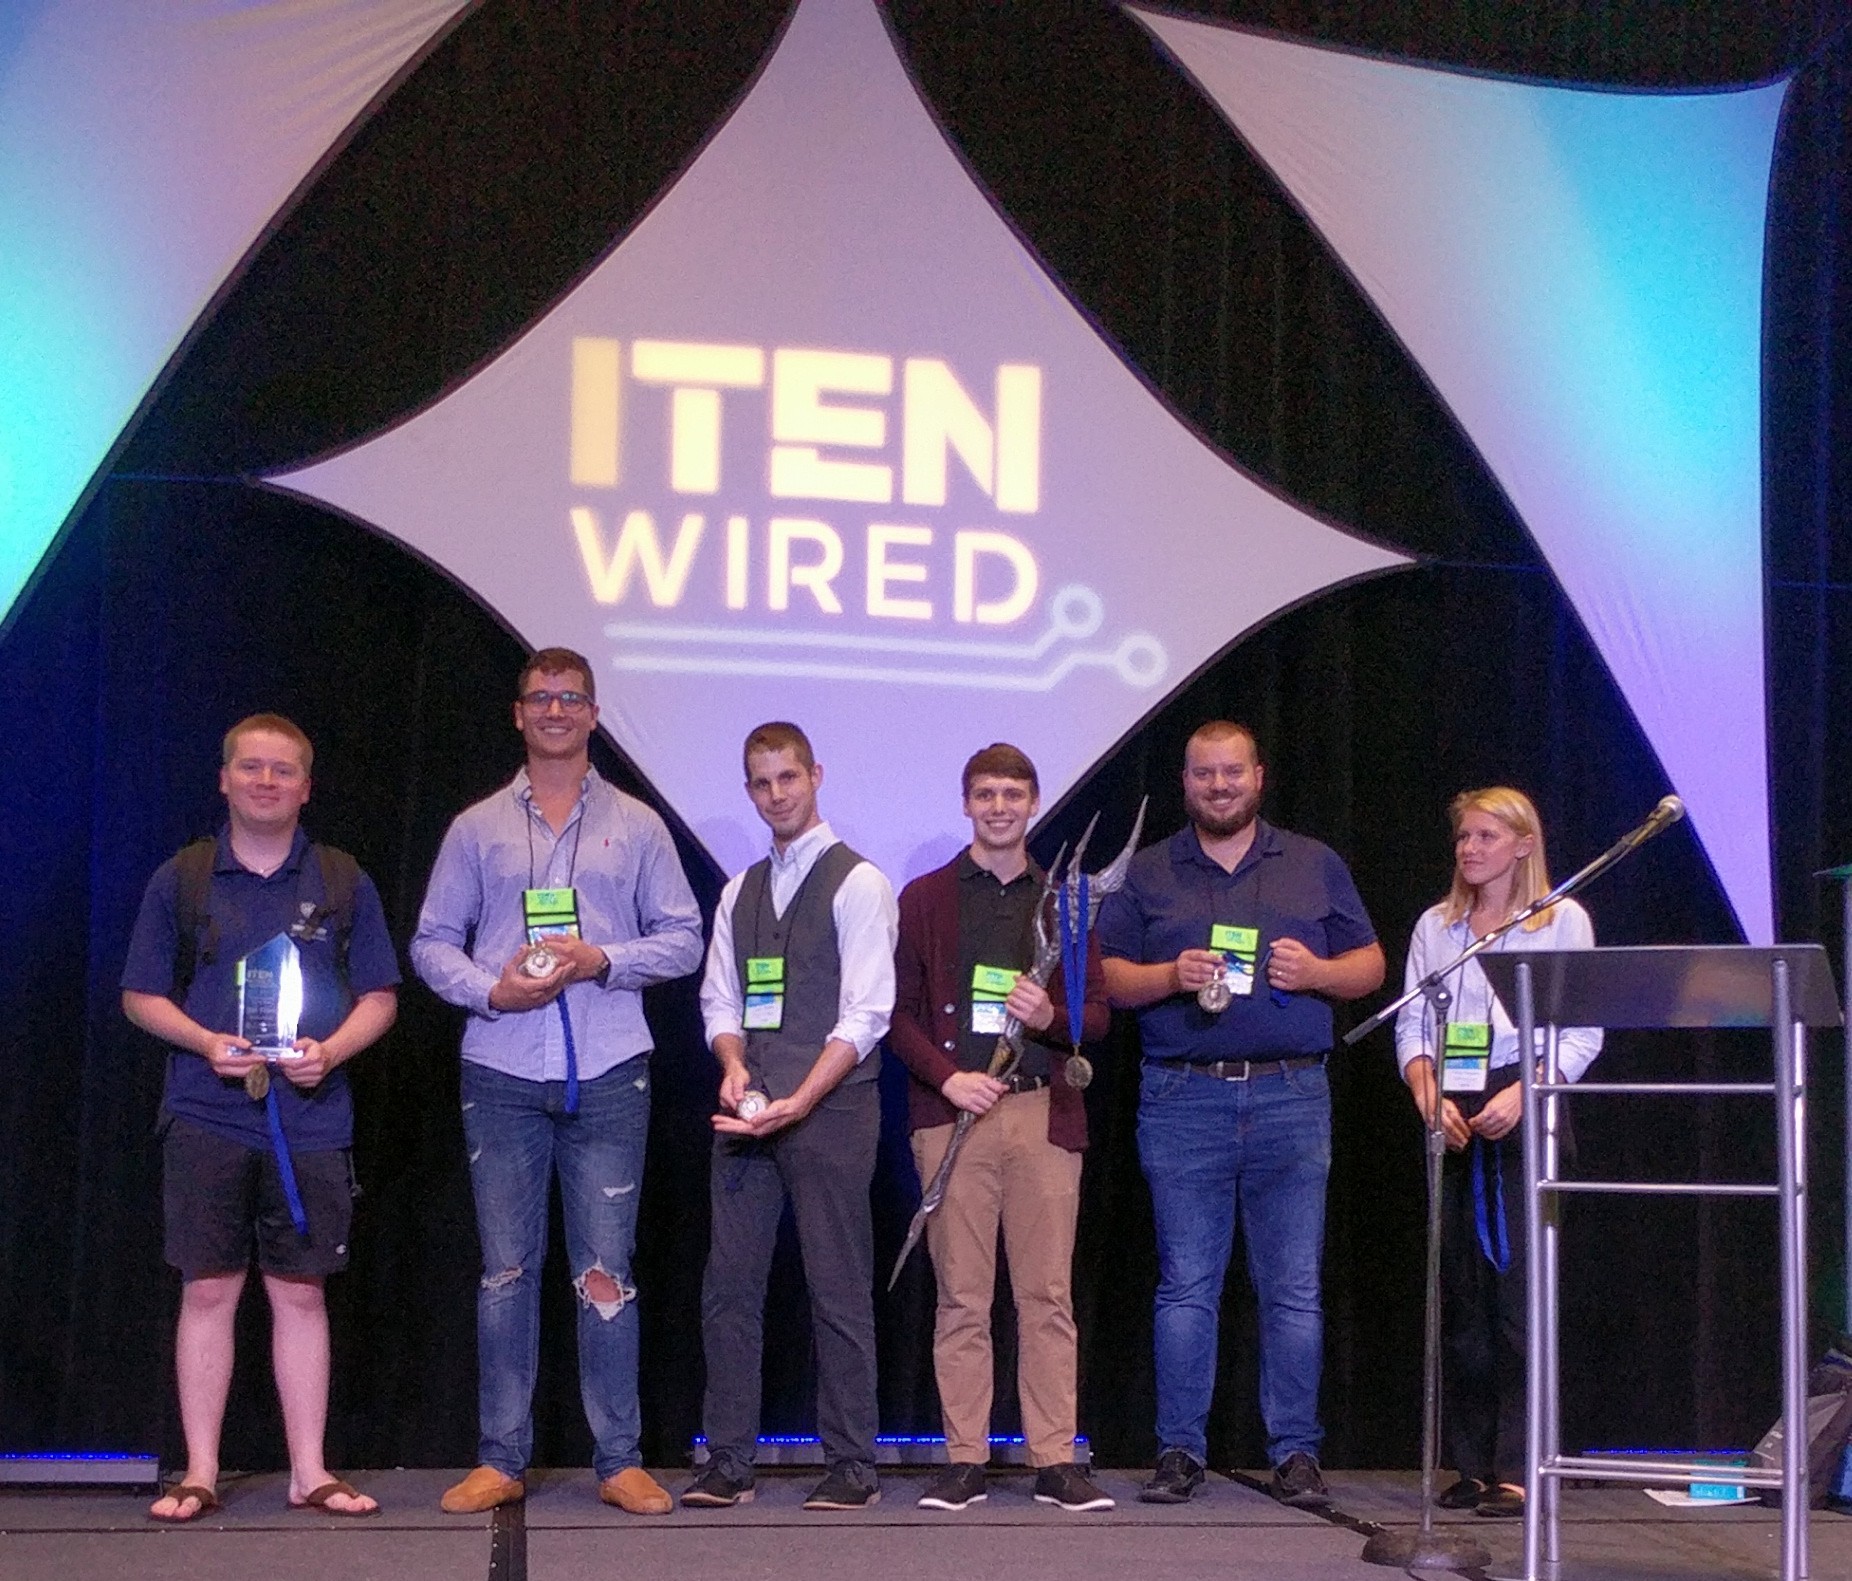 UWF Cybersecurity students received their award at the ITEN WIRED competition